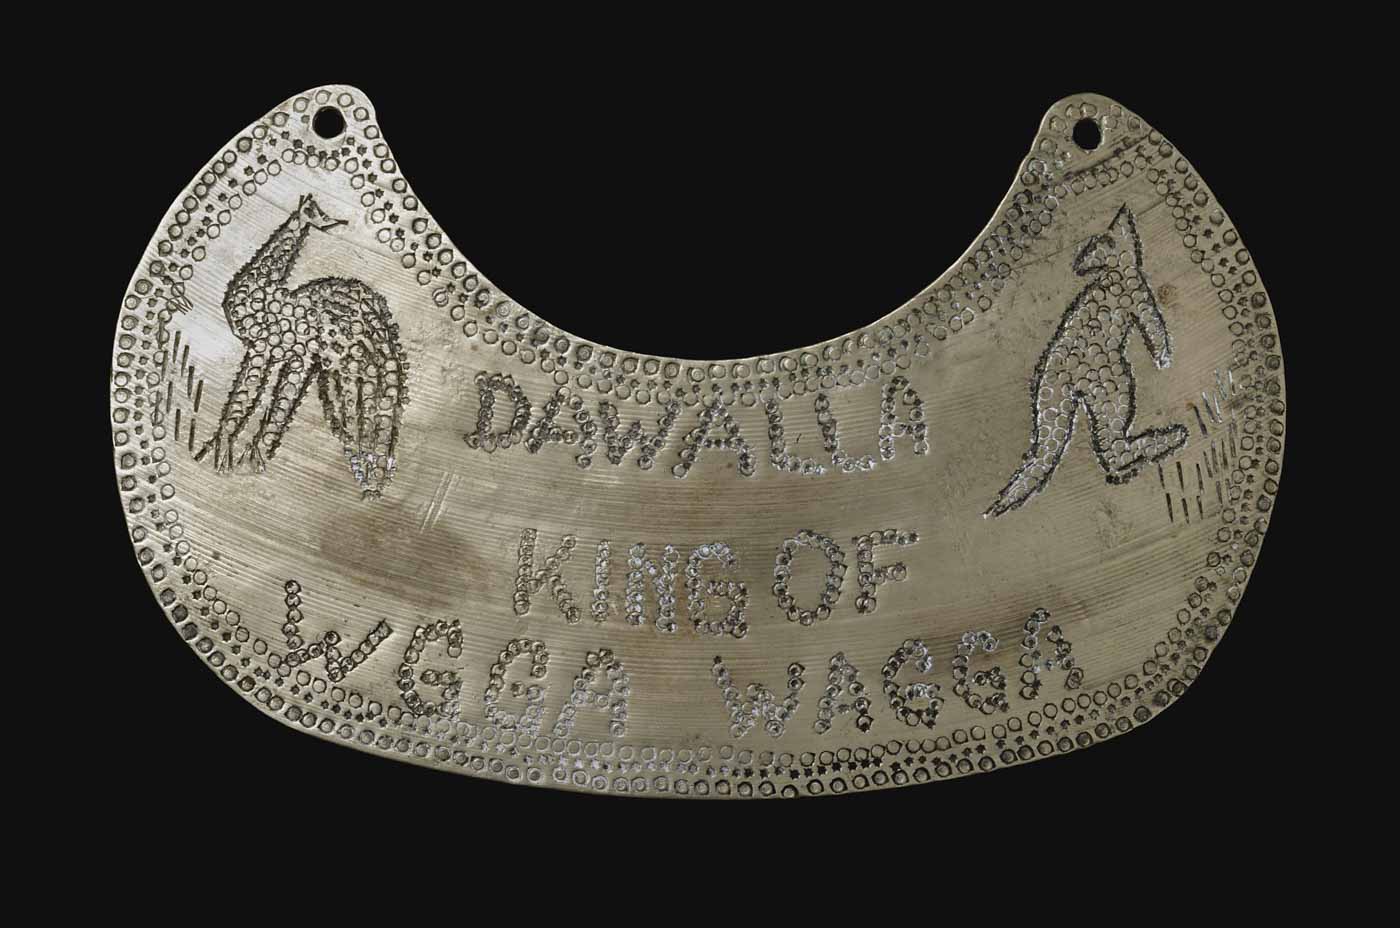 Engraved breastplate with images of a kangaroo and emu and a decorative border. - click to view larger image